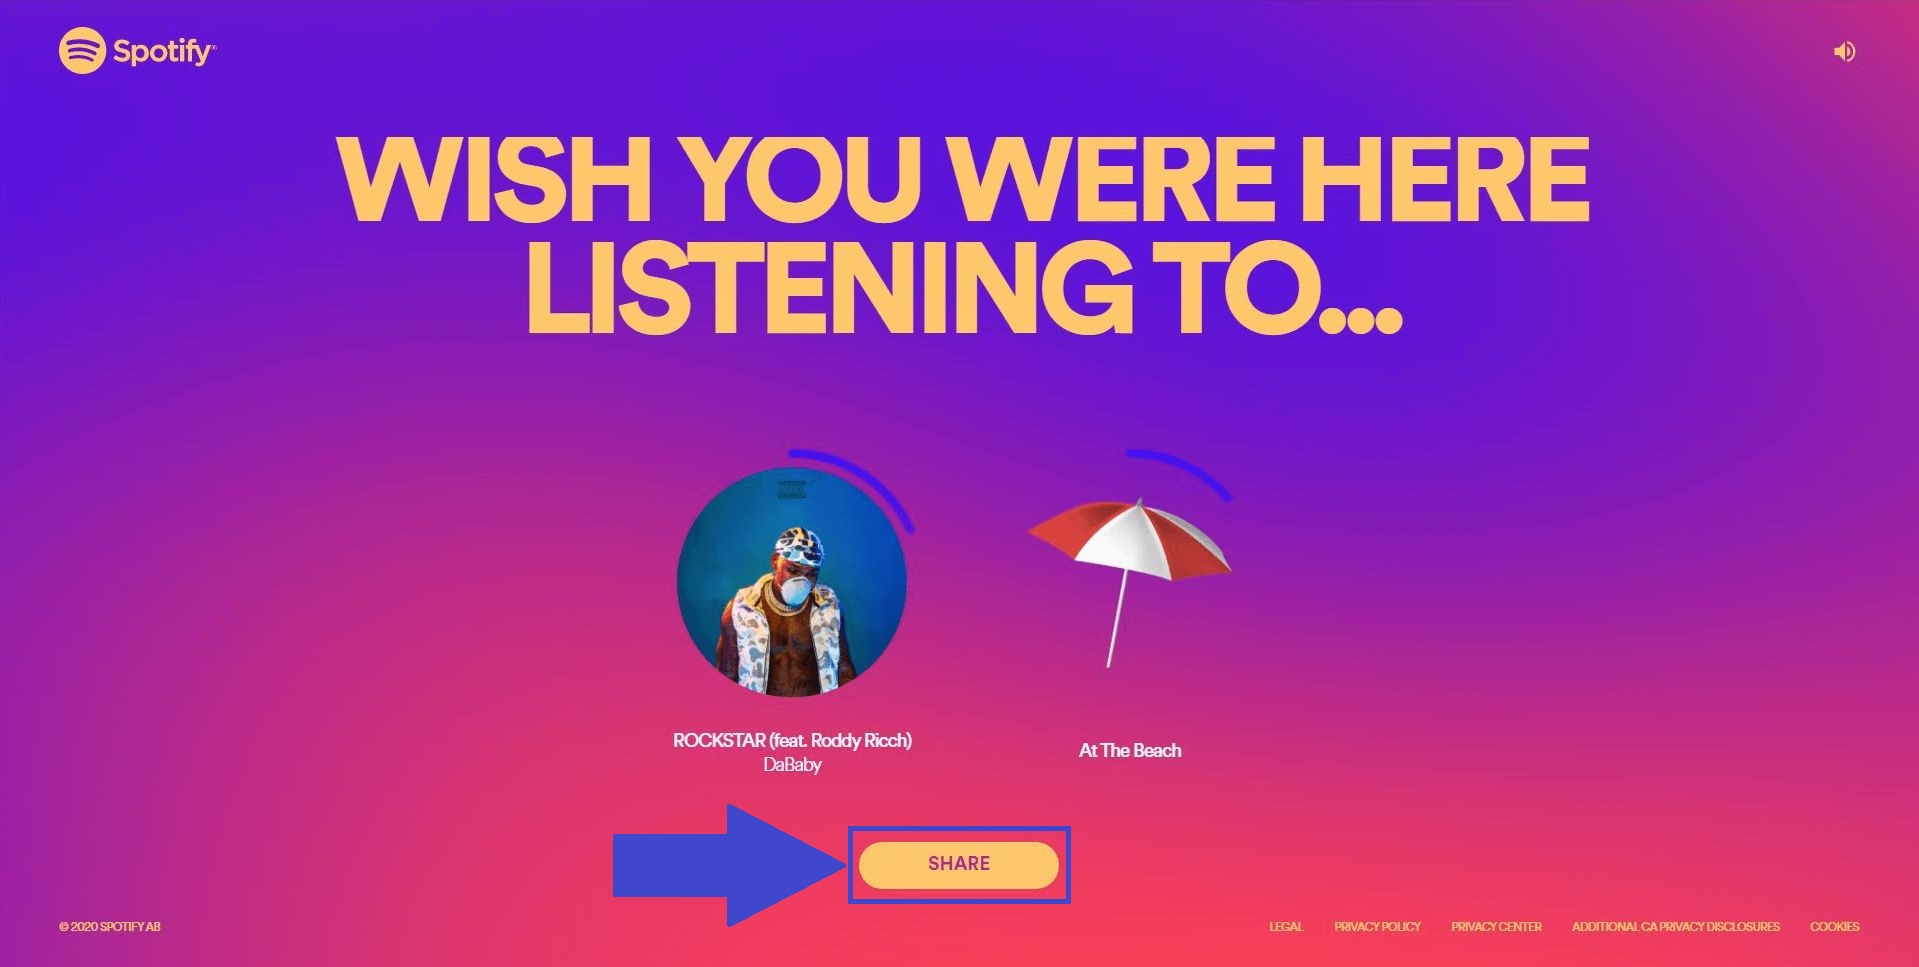 spotify lets you apply filters to spotify songs